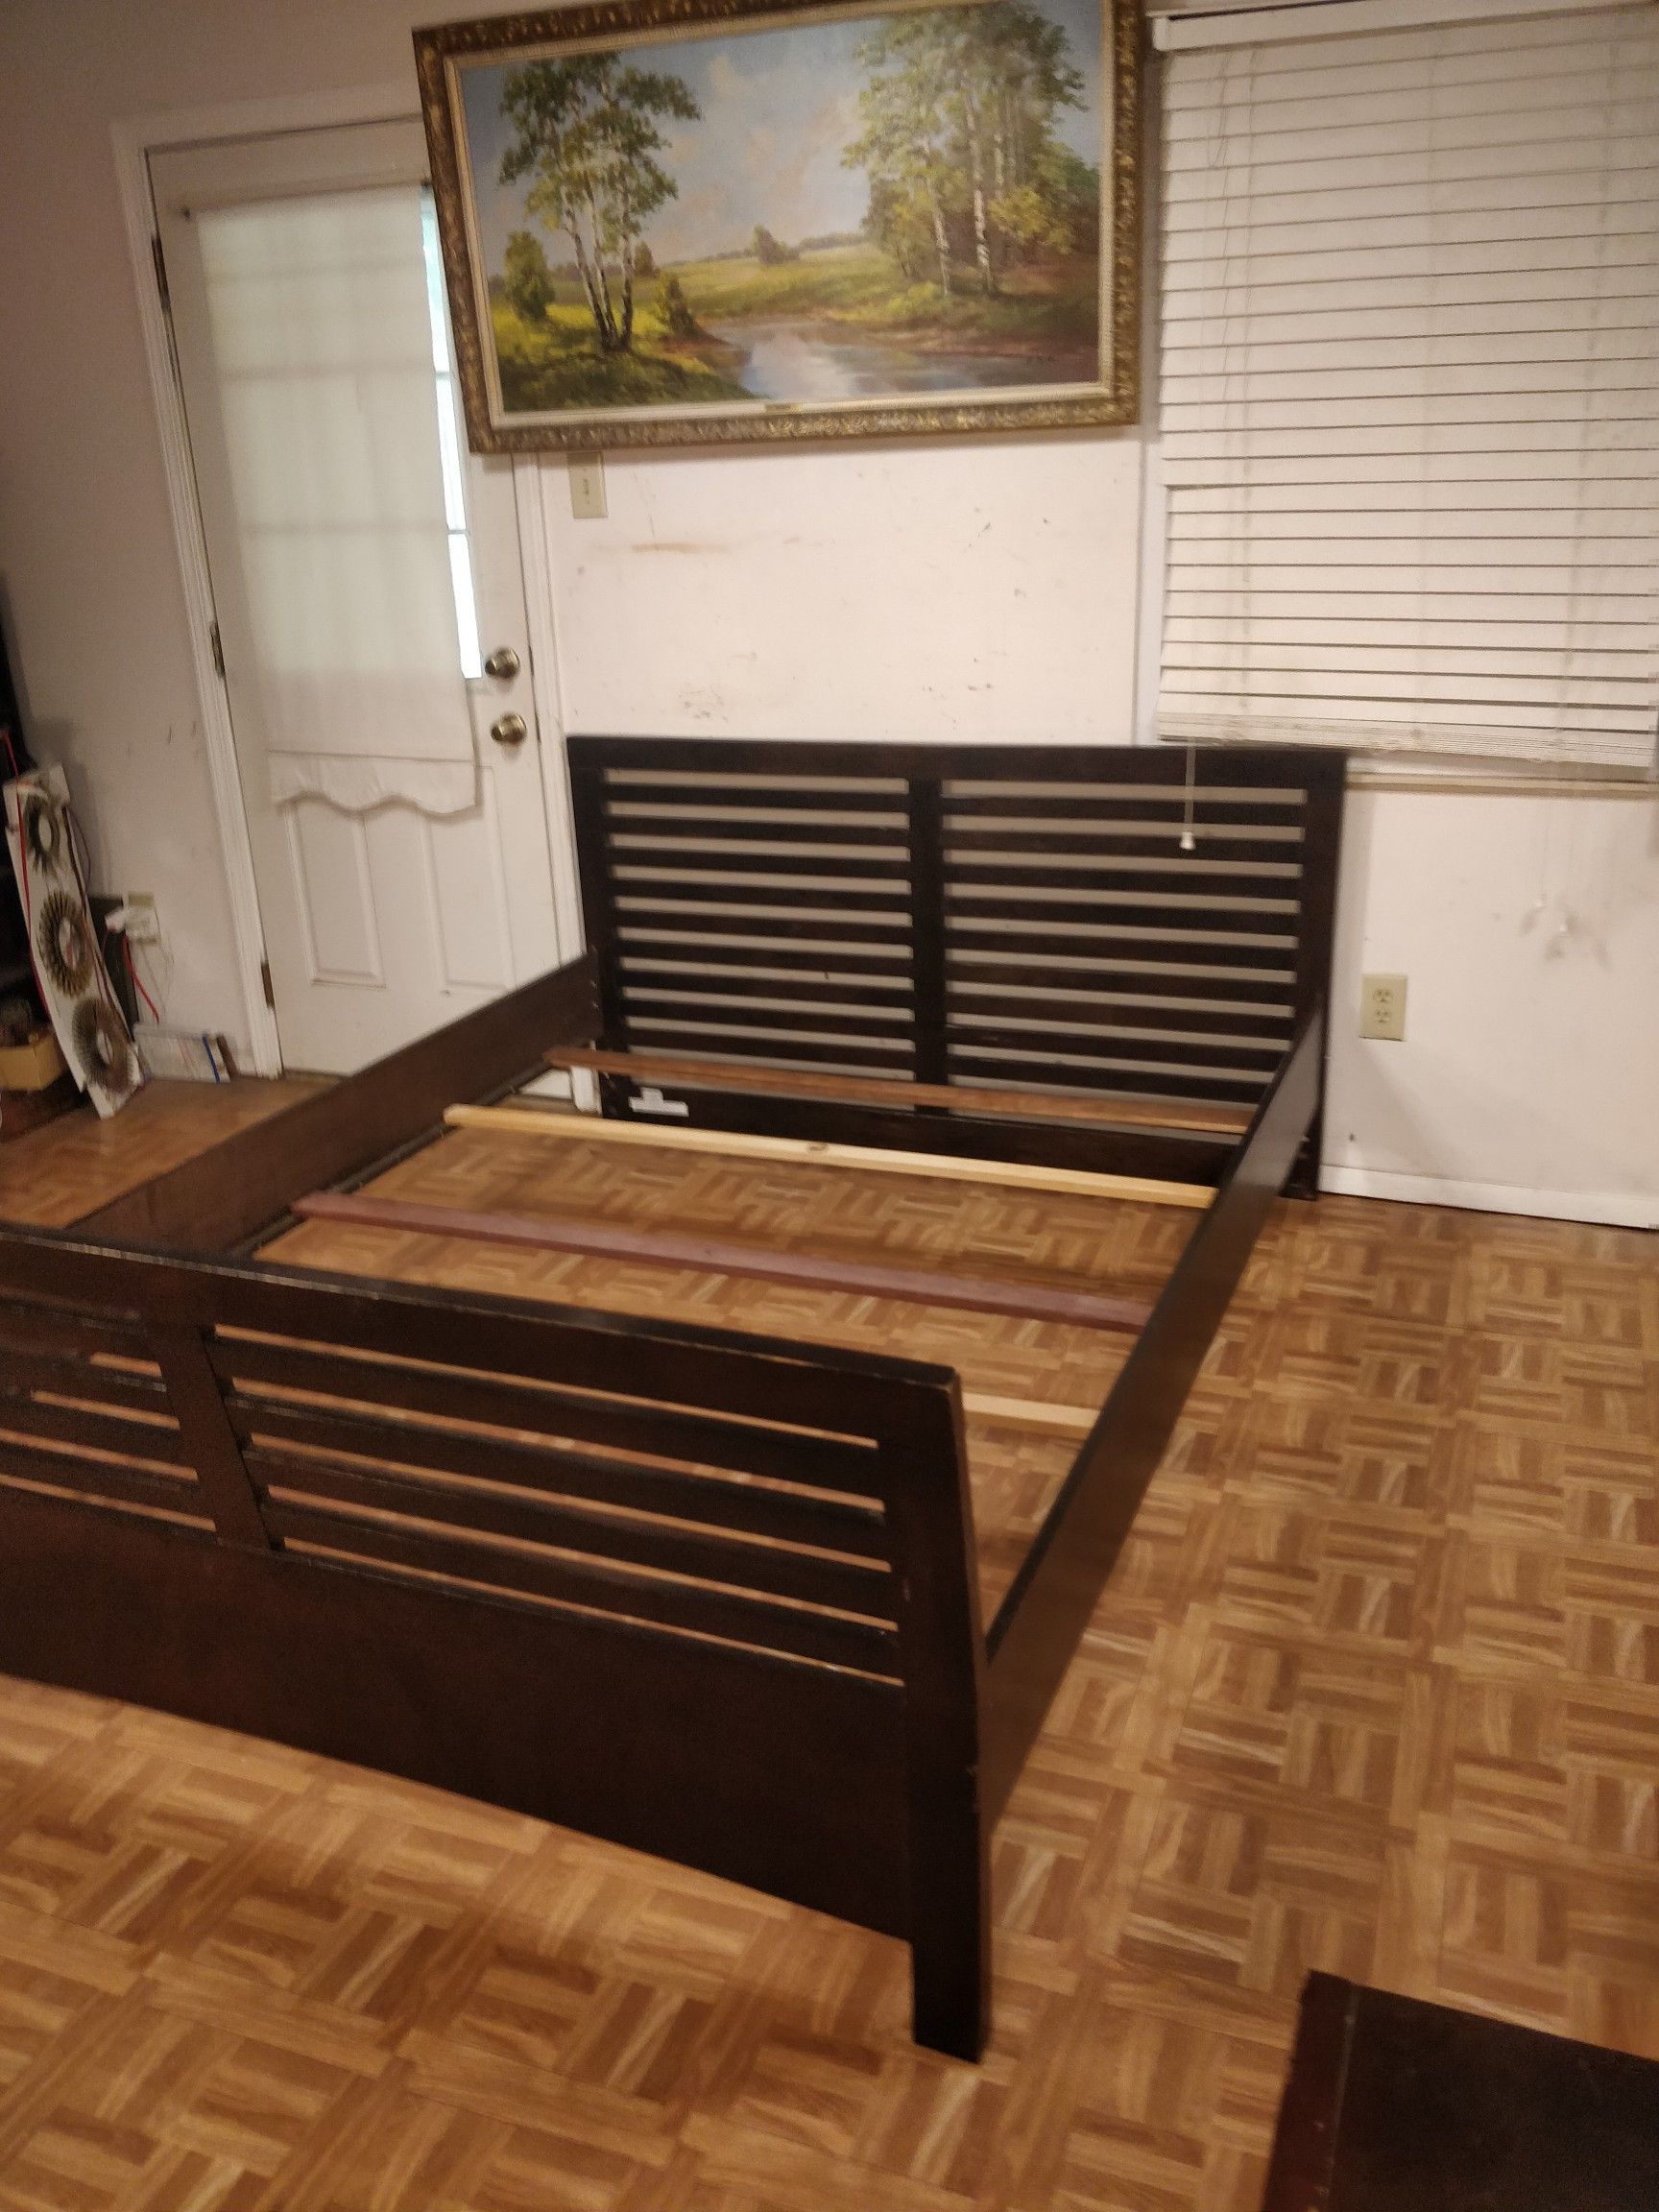 Queen bed frame in good condition, pet free smoke free, driveway pickup.